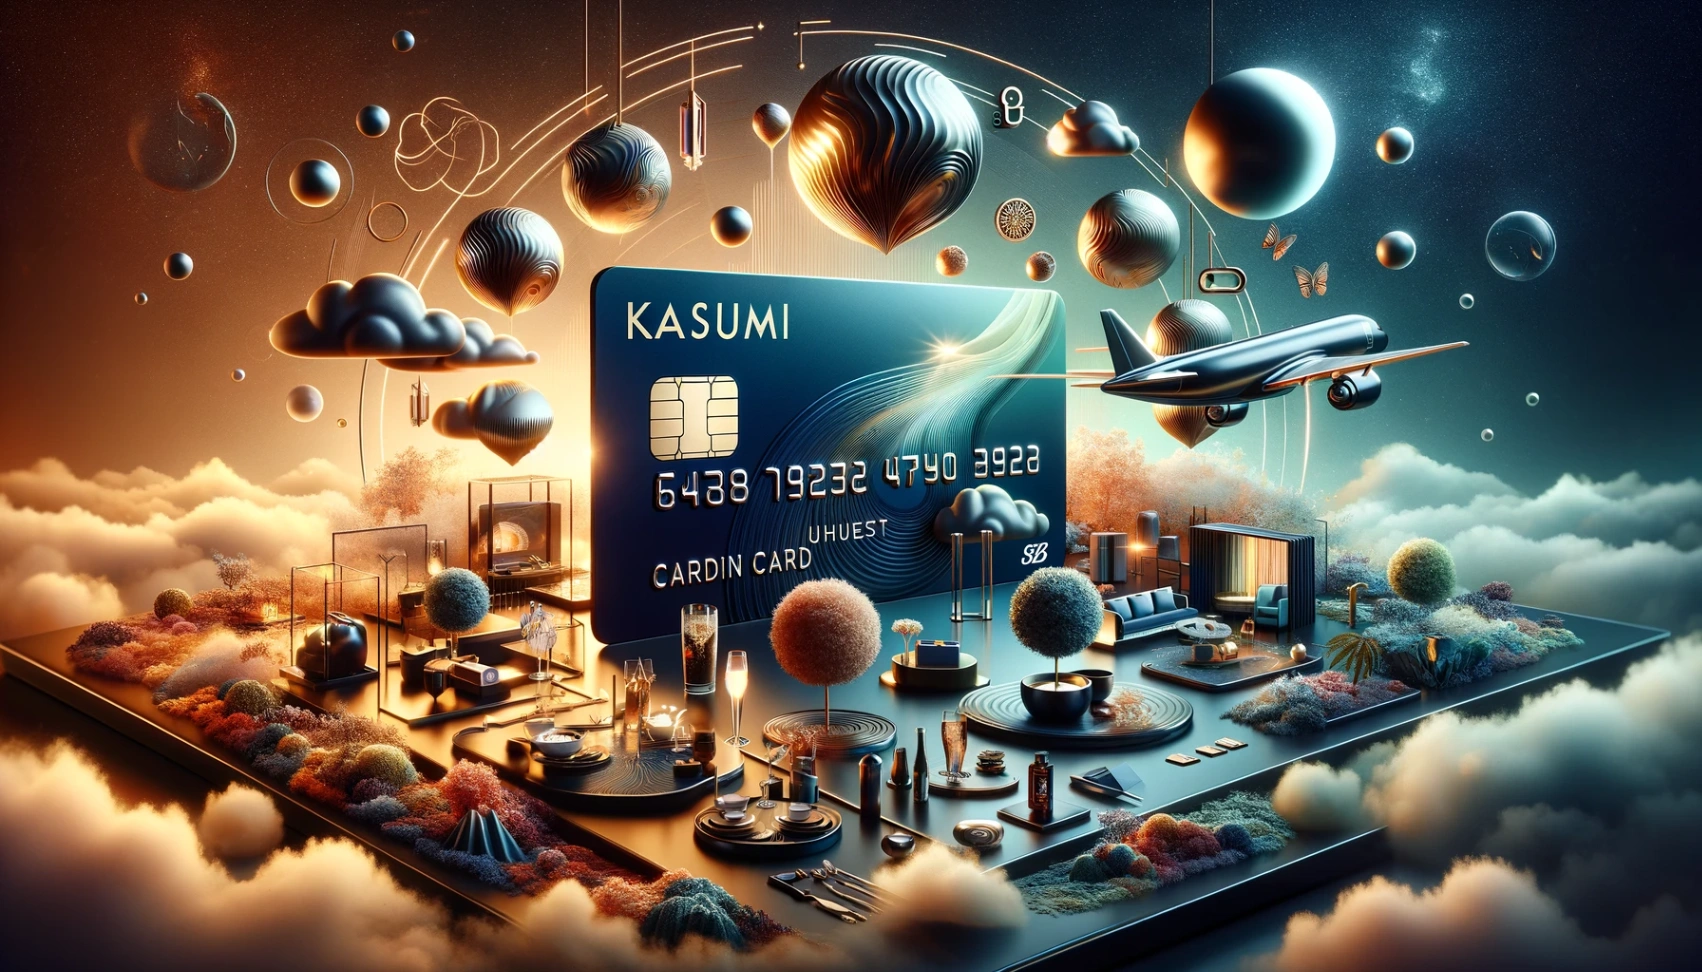 KASUMI Credit Card - How to Apply Online Tutorial